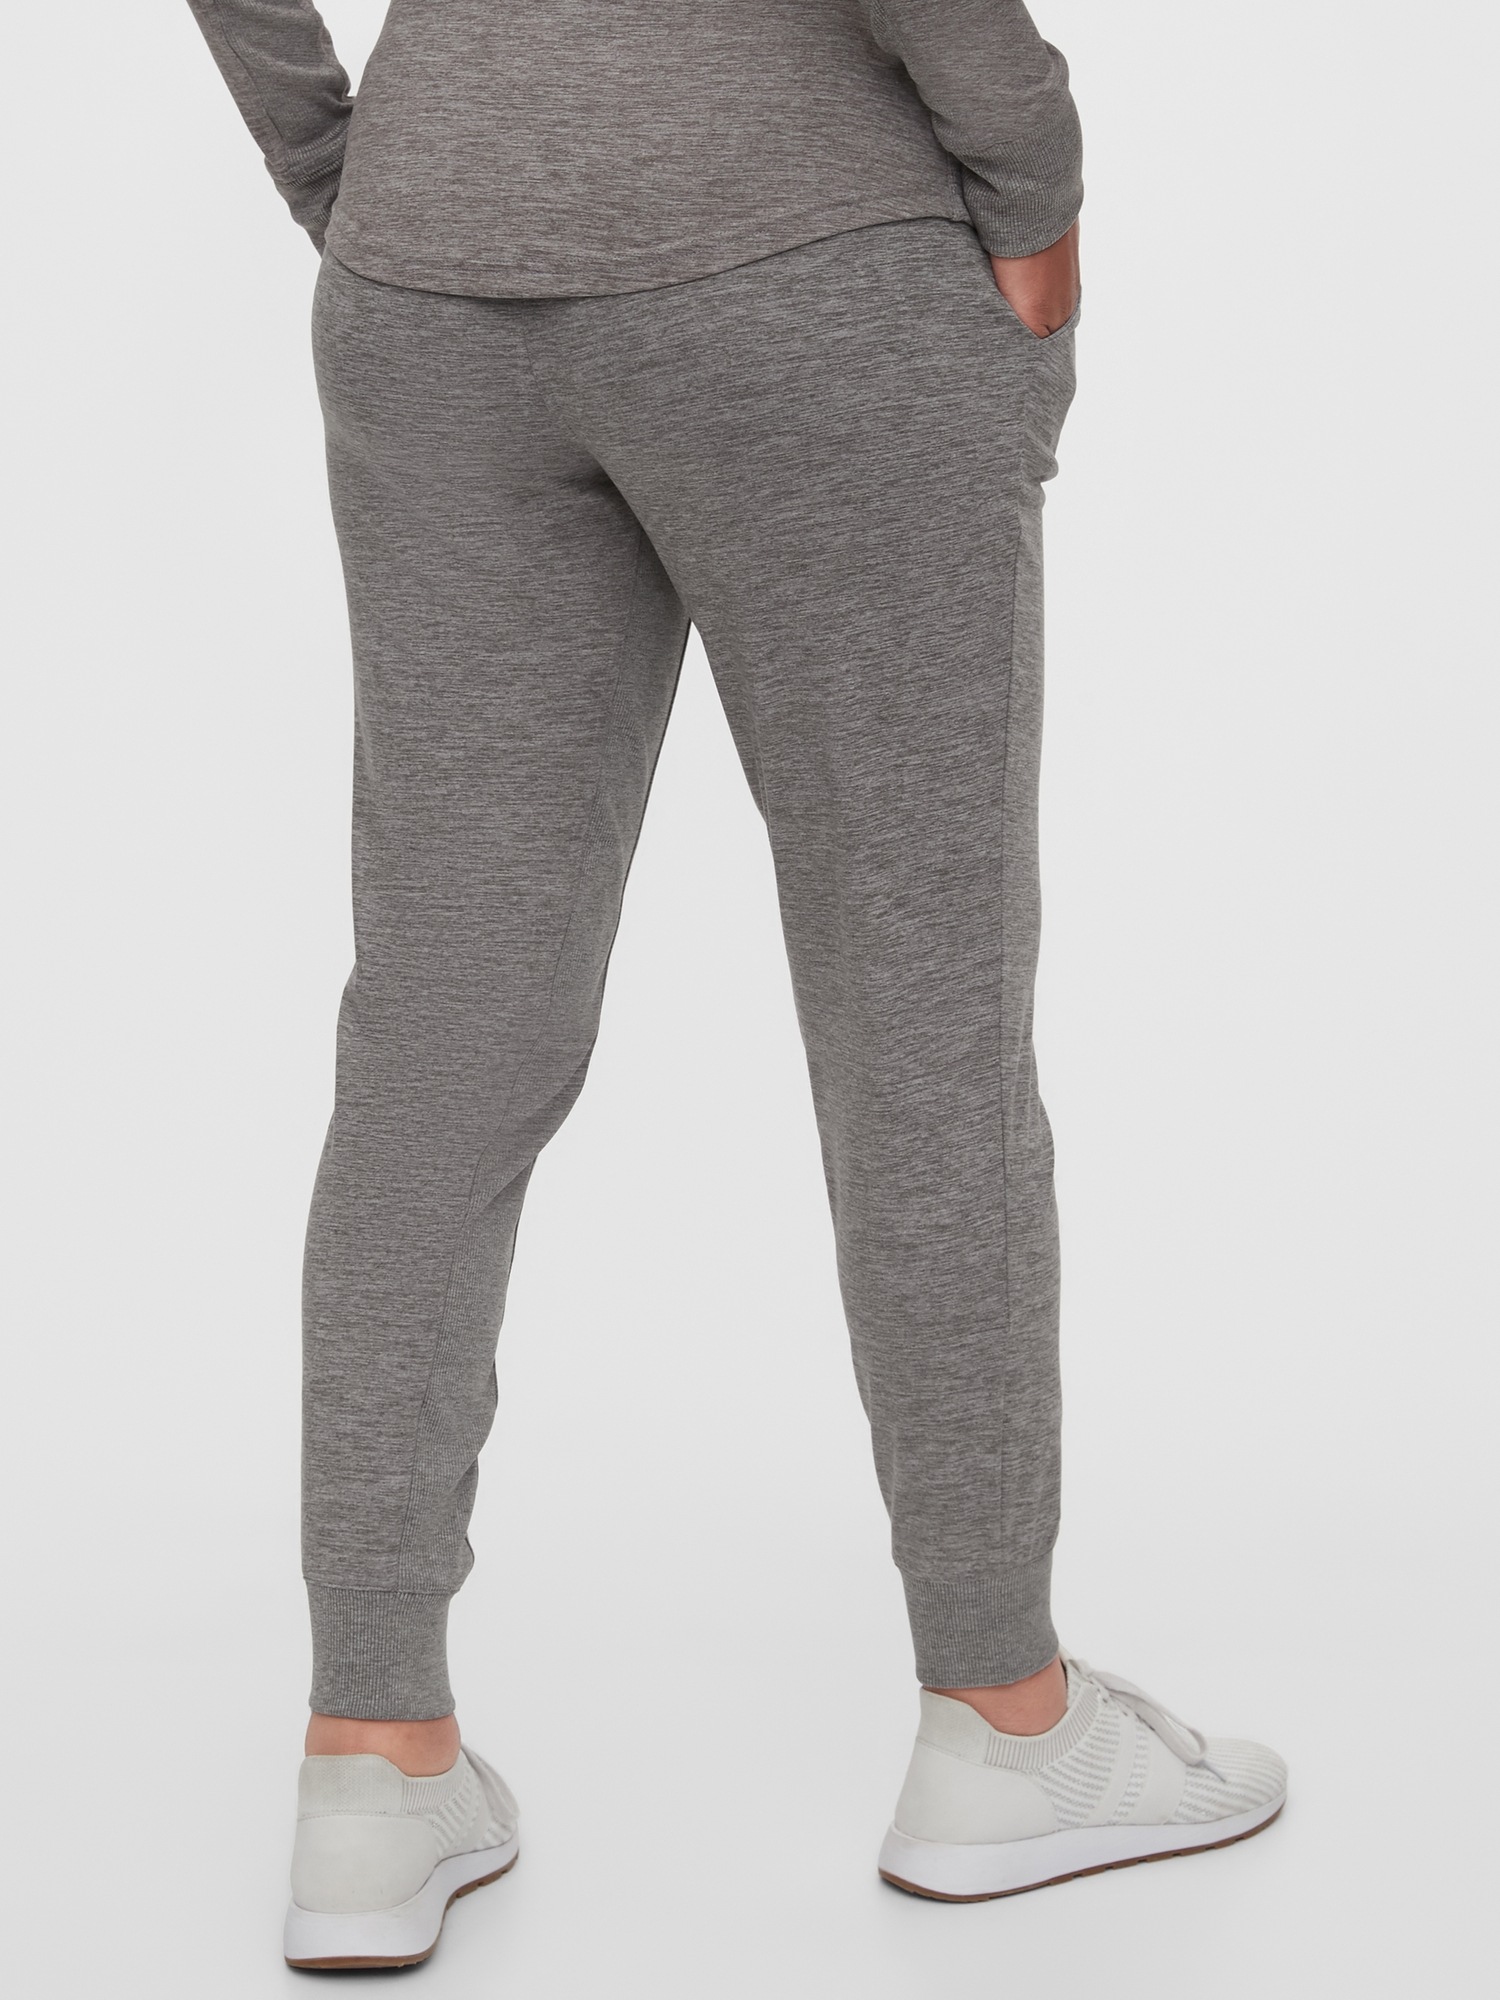 nipocaio Womens Maternity/Pregnancy Jogger Pants Over The Belly Sweatpants  grey 